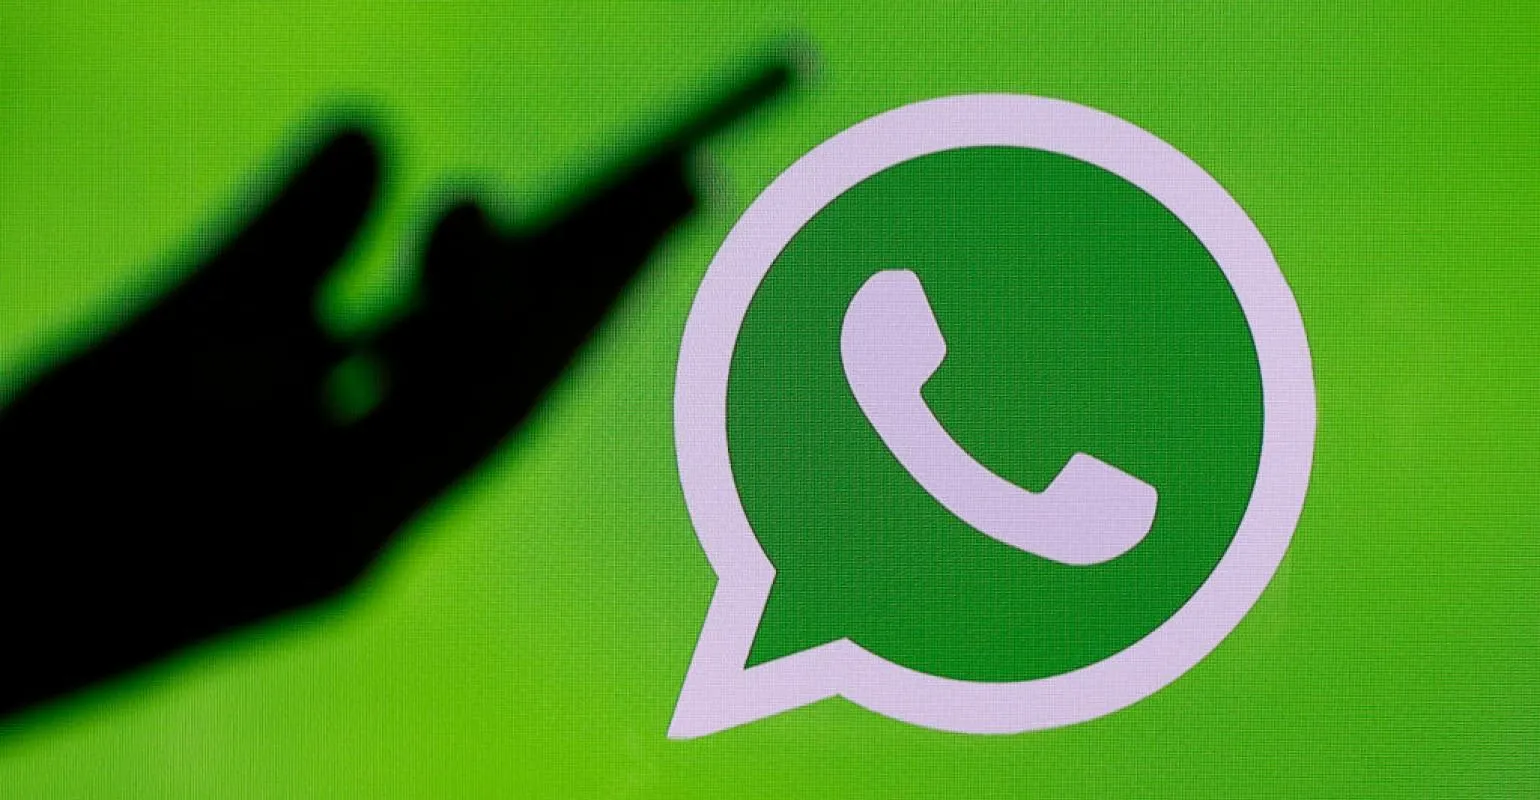 Supreme Court issued notice to Facebook and WhatsApp, seeking response on WhatsApp latest privacy policy introduced in January this year.